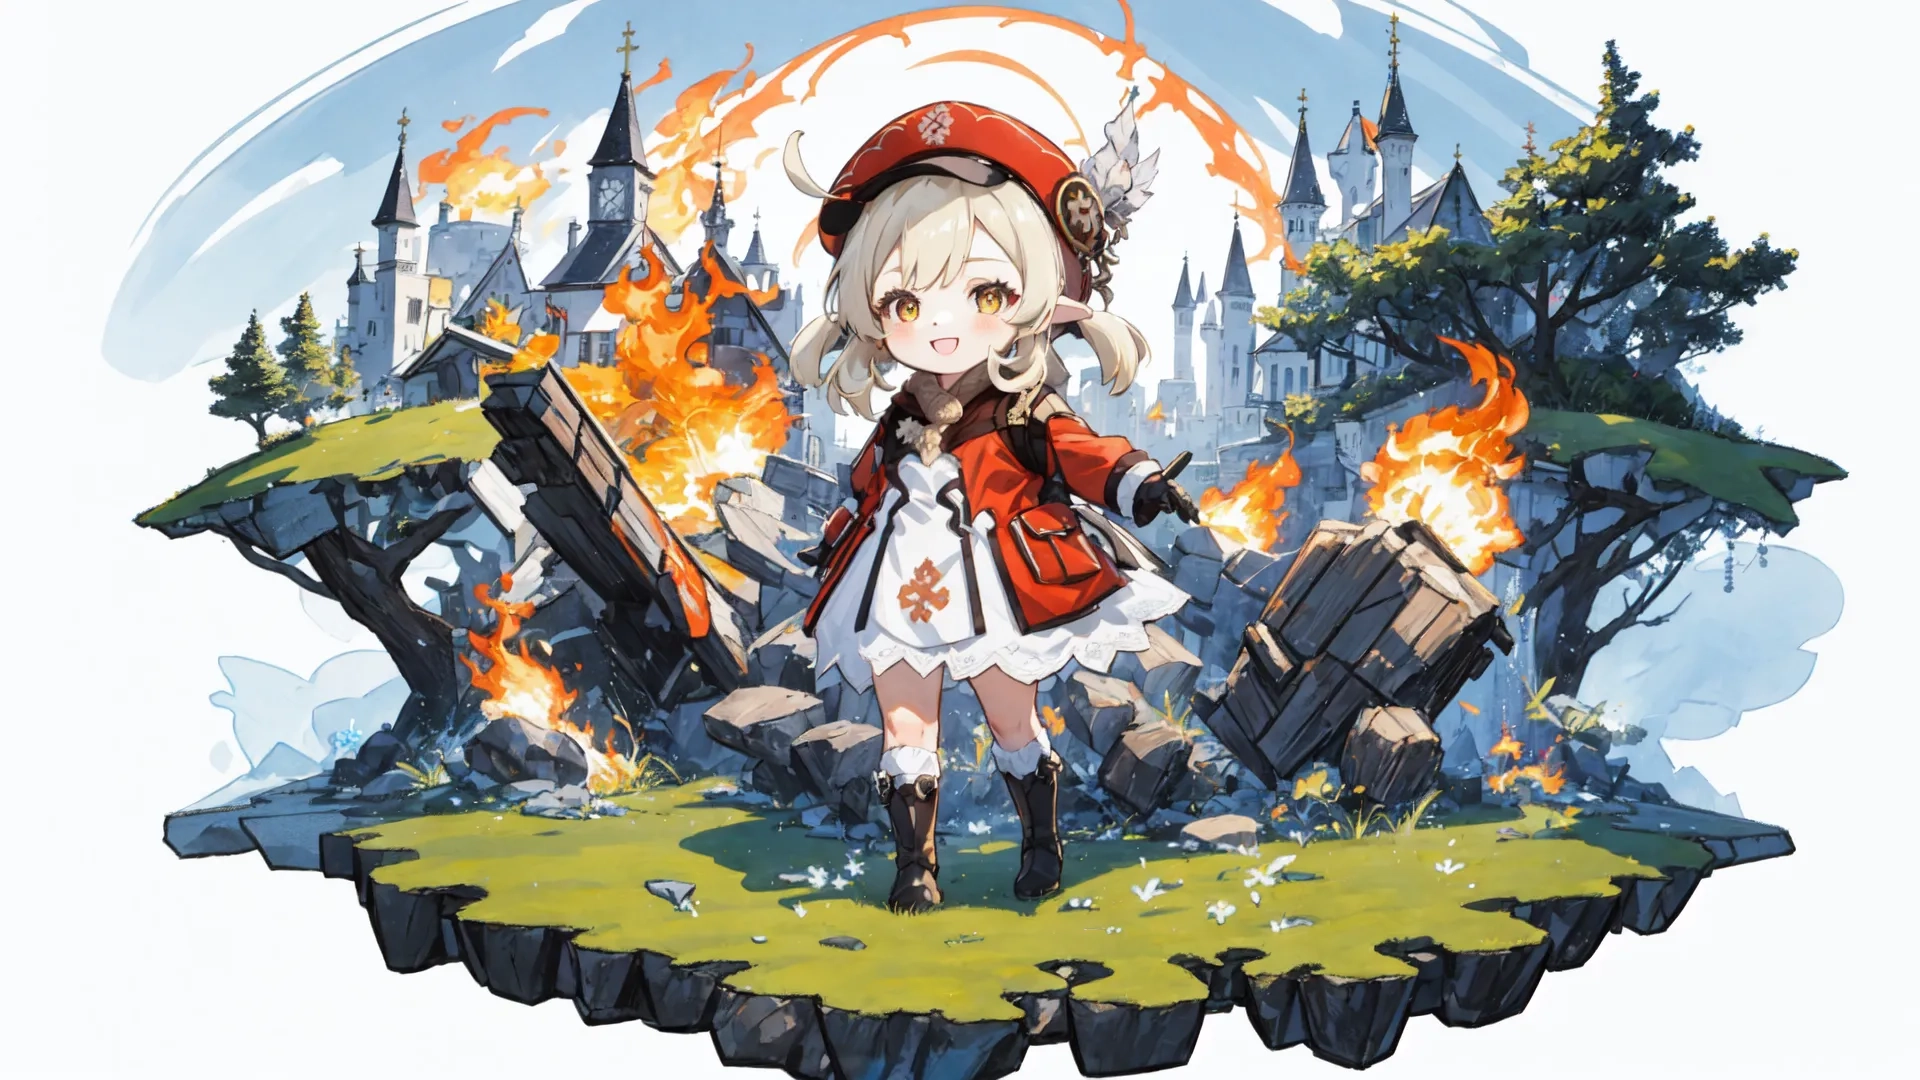 an animated illustration of a girl surrounded by rocks and boulders with flames in the background of a castle surrounded by trees and ruins of ruins
